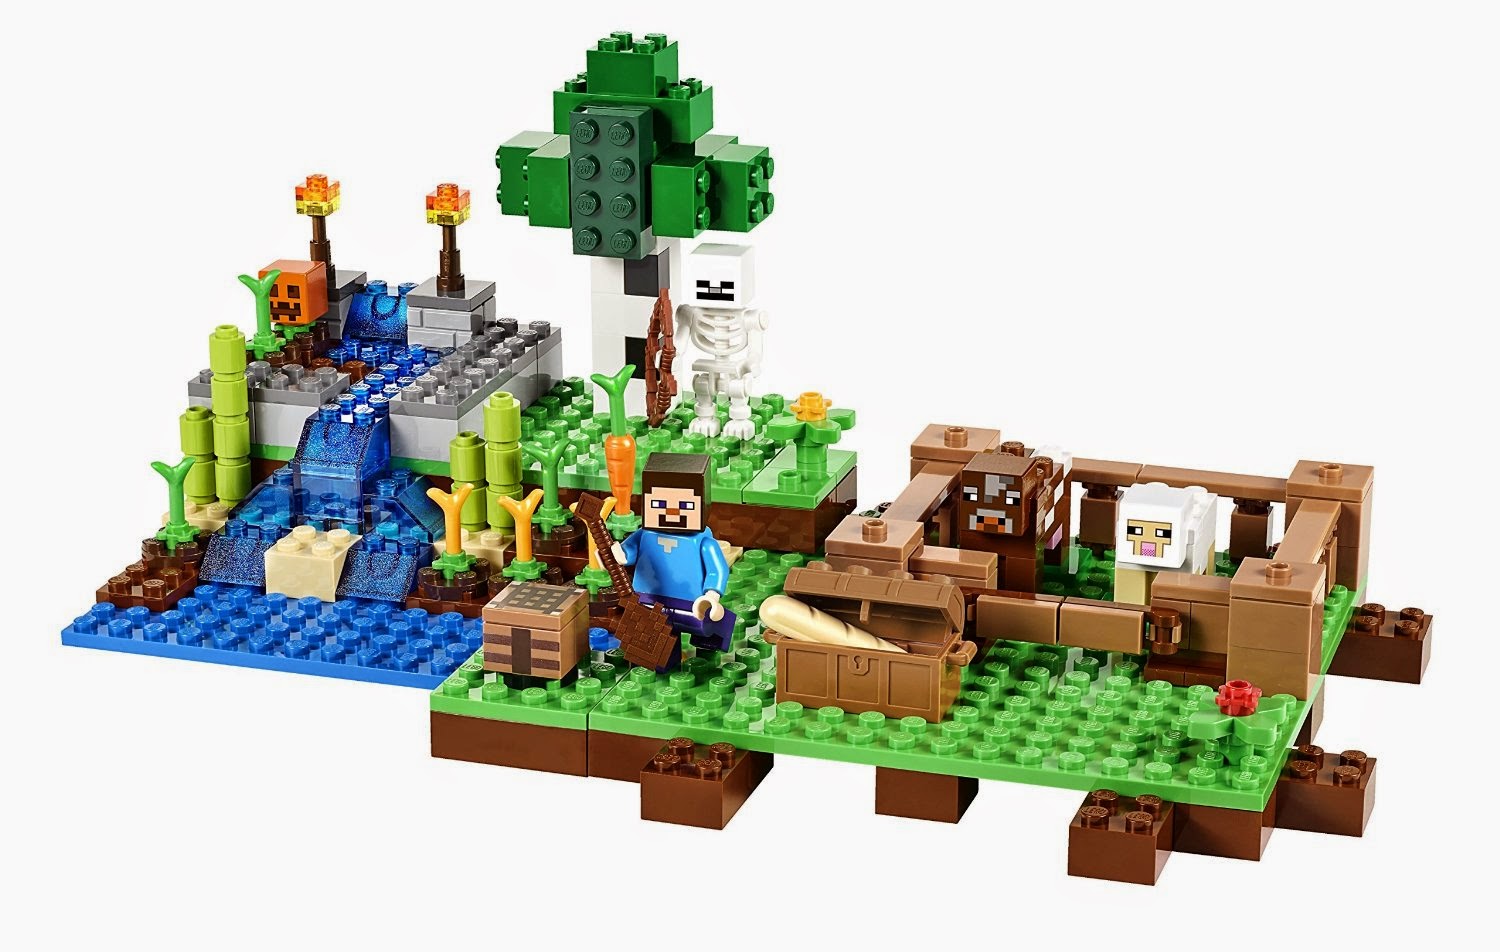 Latest Trending Toys for Boys and Girls: LEGO Minecraft - Popular toys